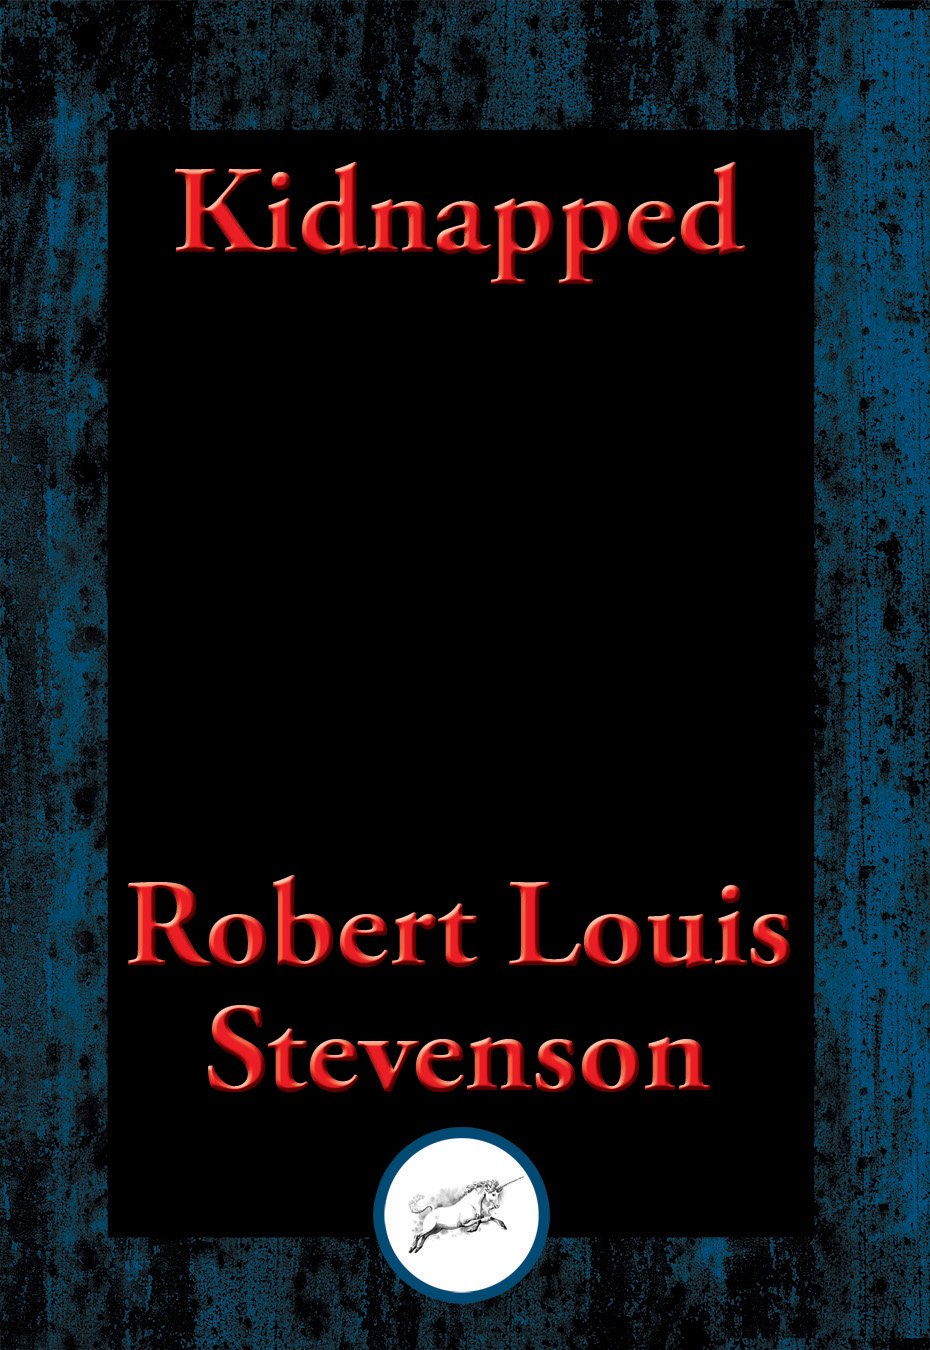 Kidnapped The Adventures of David Balfour